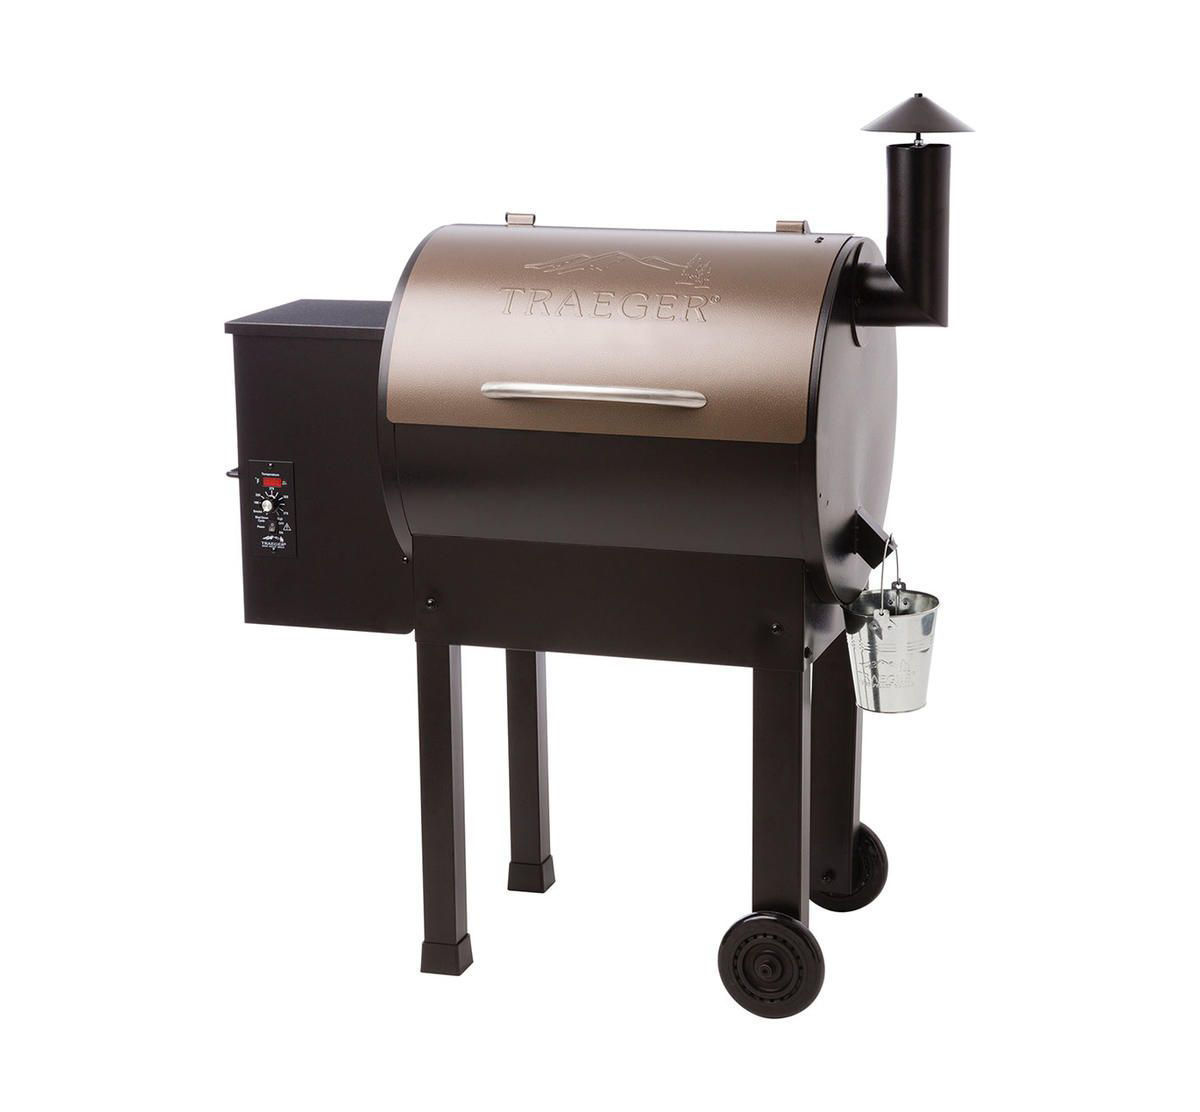 Lil Tex Elite 22 Pellet Grill Badcock Home Furniture More,Weeping Willow Tree Drawing